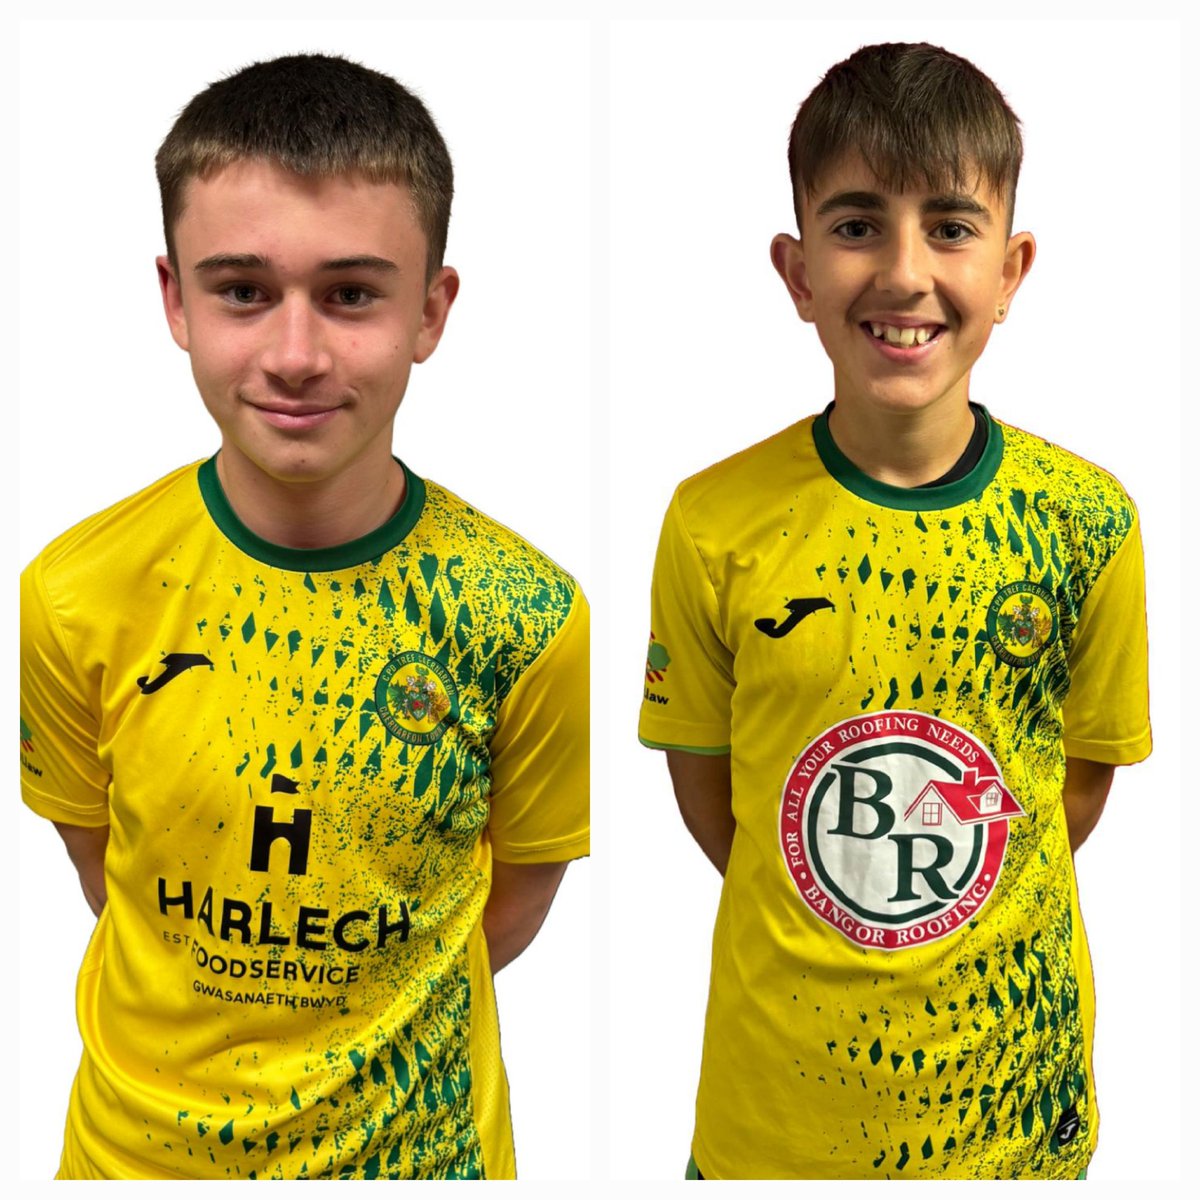 Congratulations to @CfonTownAcademy players Monty and Jac who represented @FAWales National 2009, and 2010 squads in games v @BristolCity #development #future